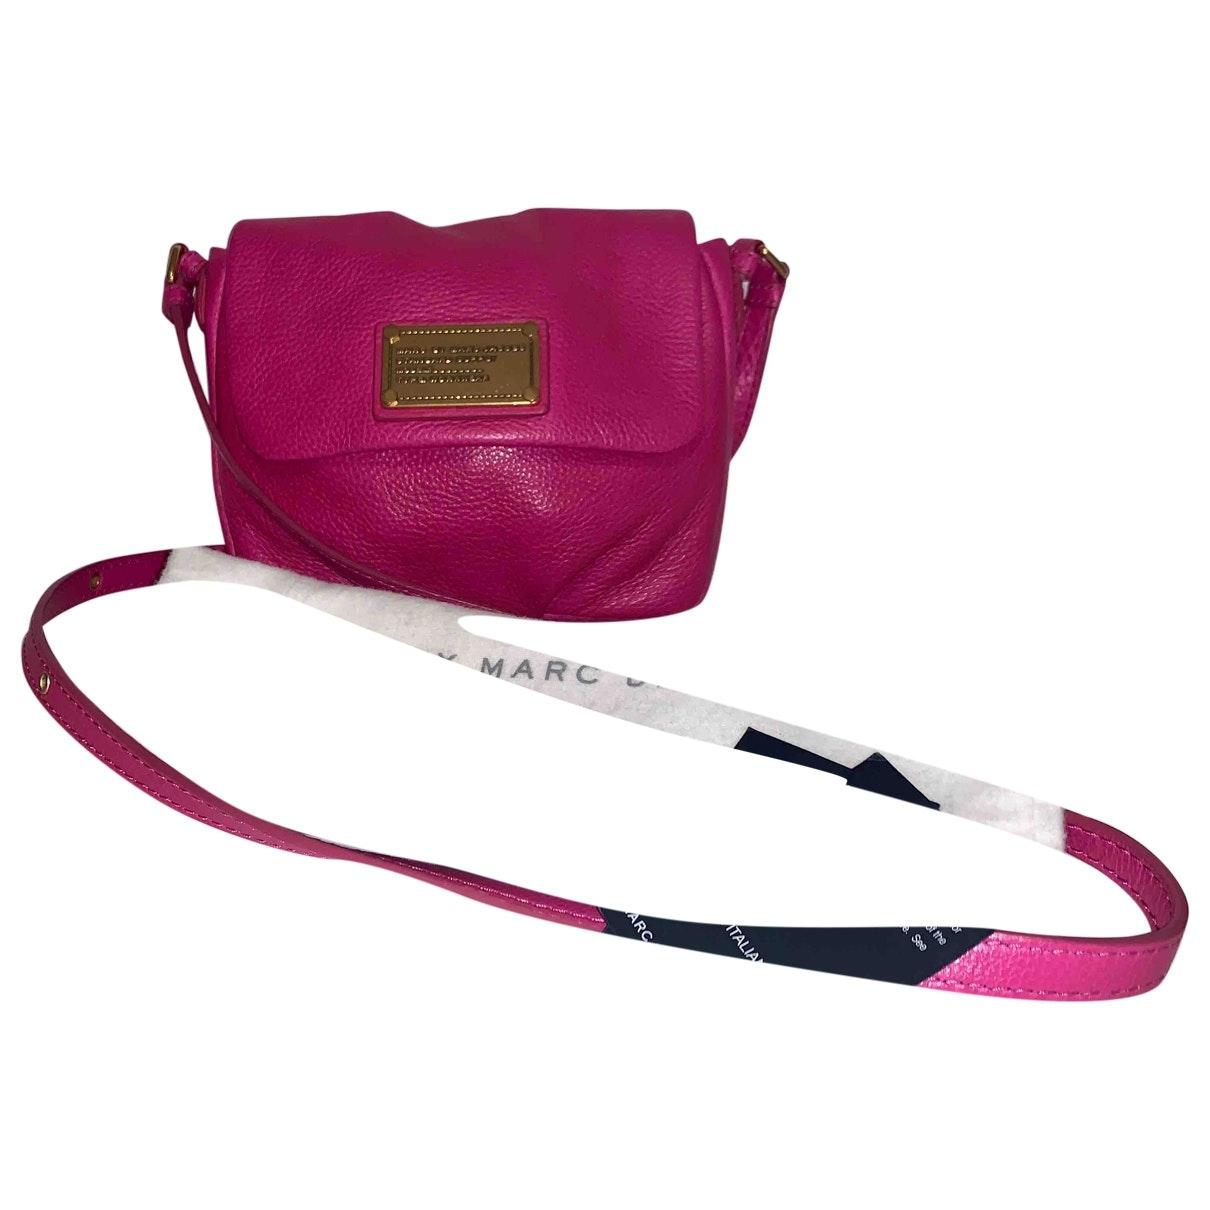 Marc By Marc Jacobs Leather Crossbody Bag in Pink - Lyst